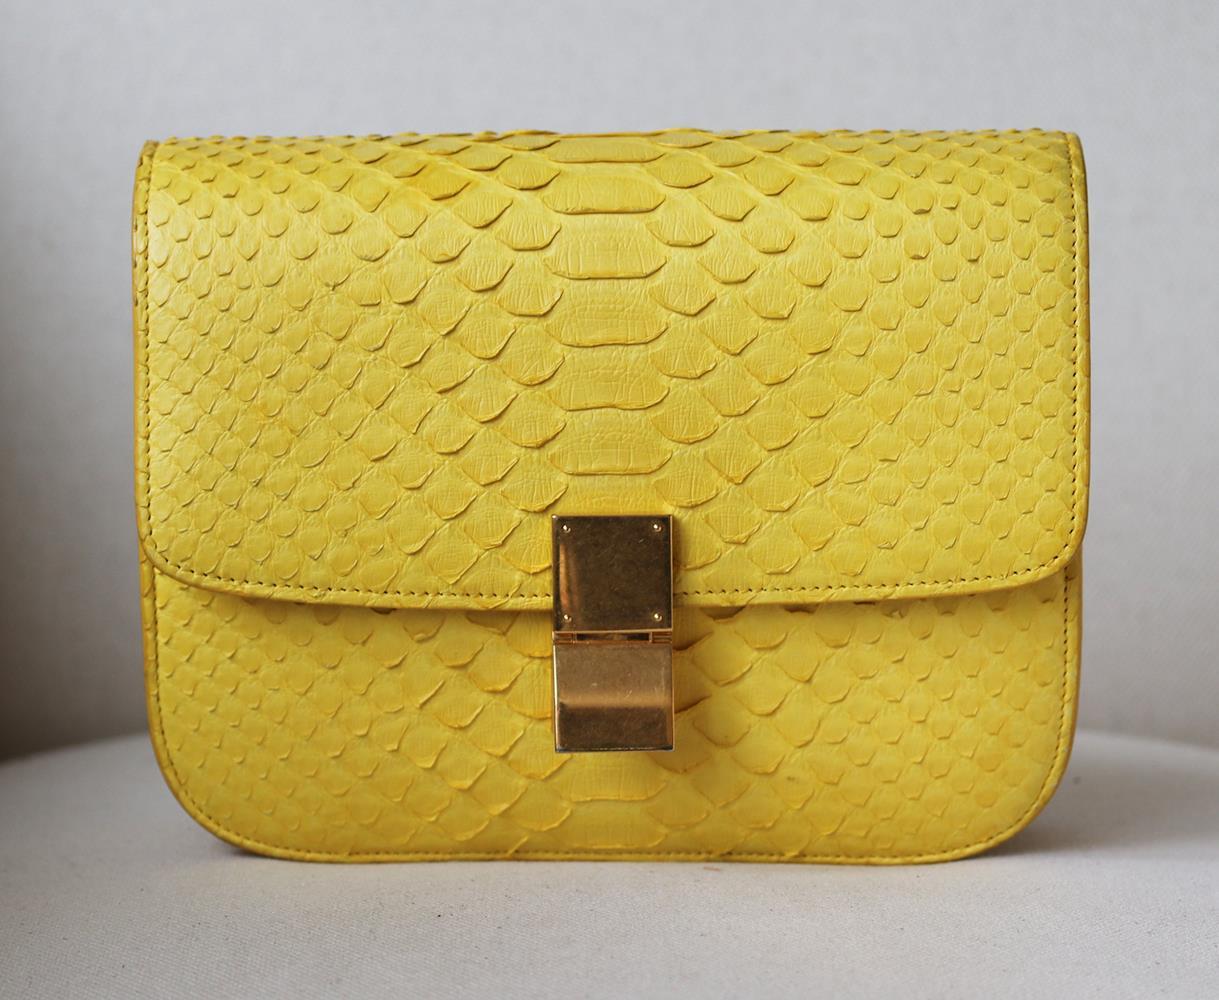 This shoulder bag has been made in France from bright-yellow python-leather with Celine's iconic gold-tone fastening, the pushlock fastening opens to reveal a yellow leather interior. Can be carried by its python leather and leather strap. Yellow